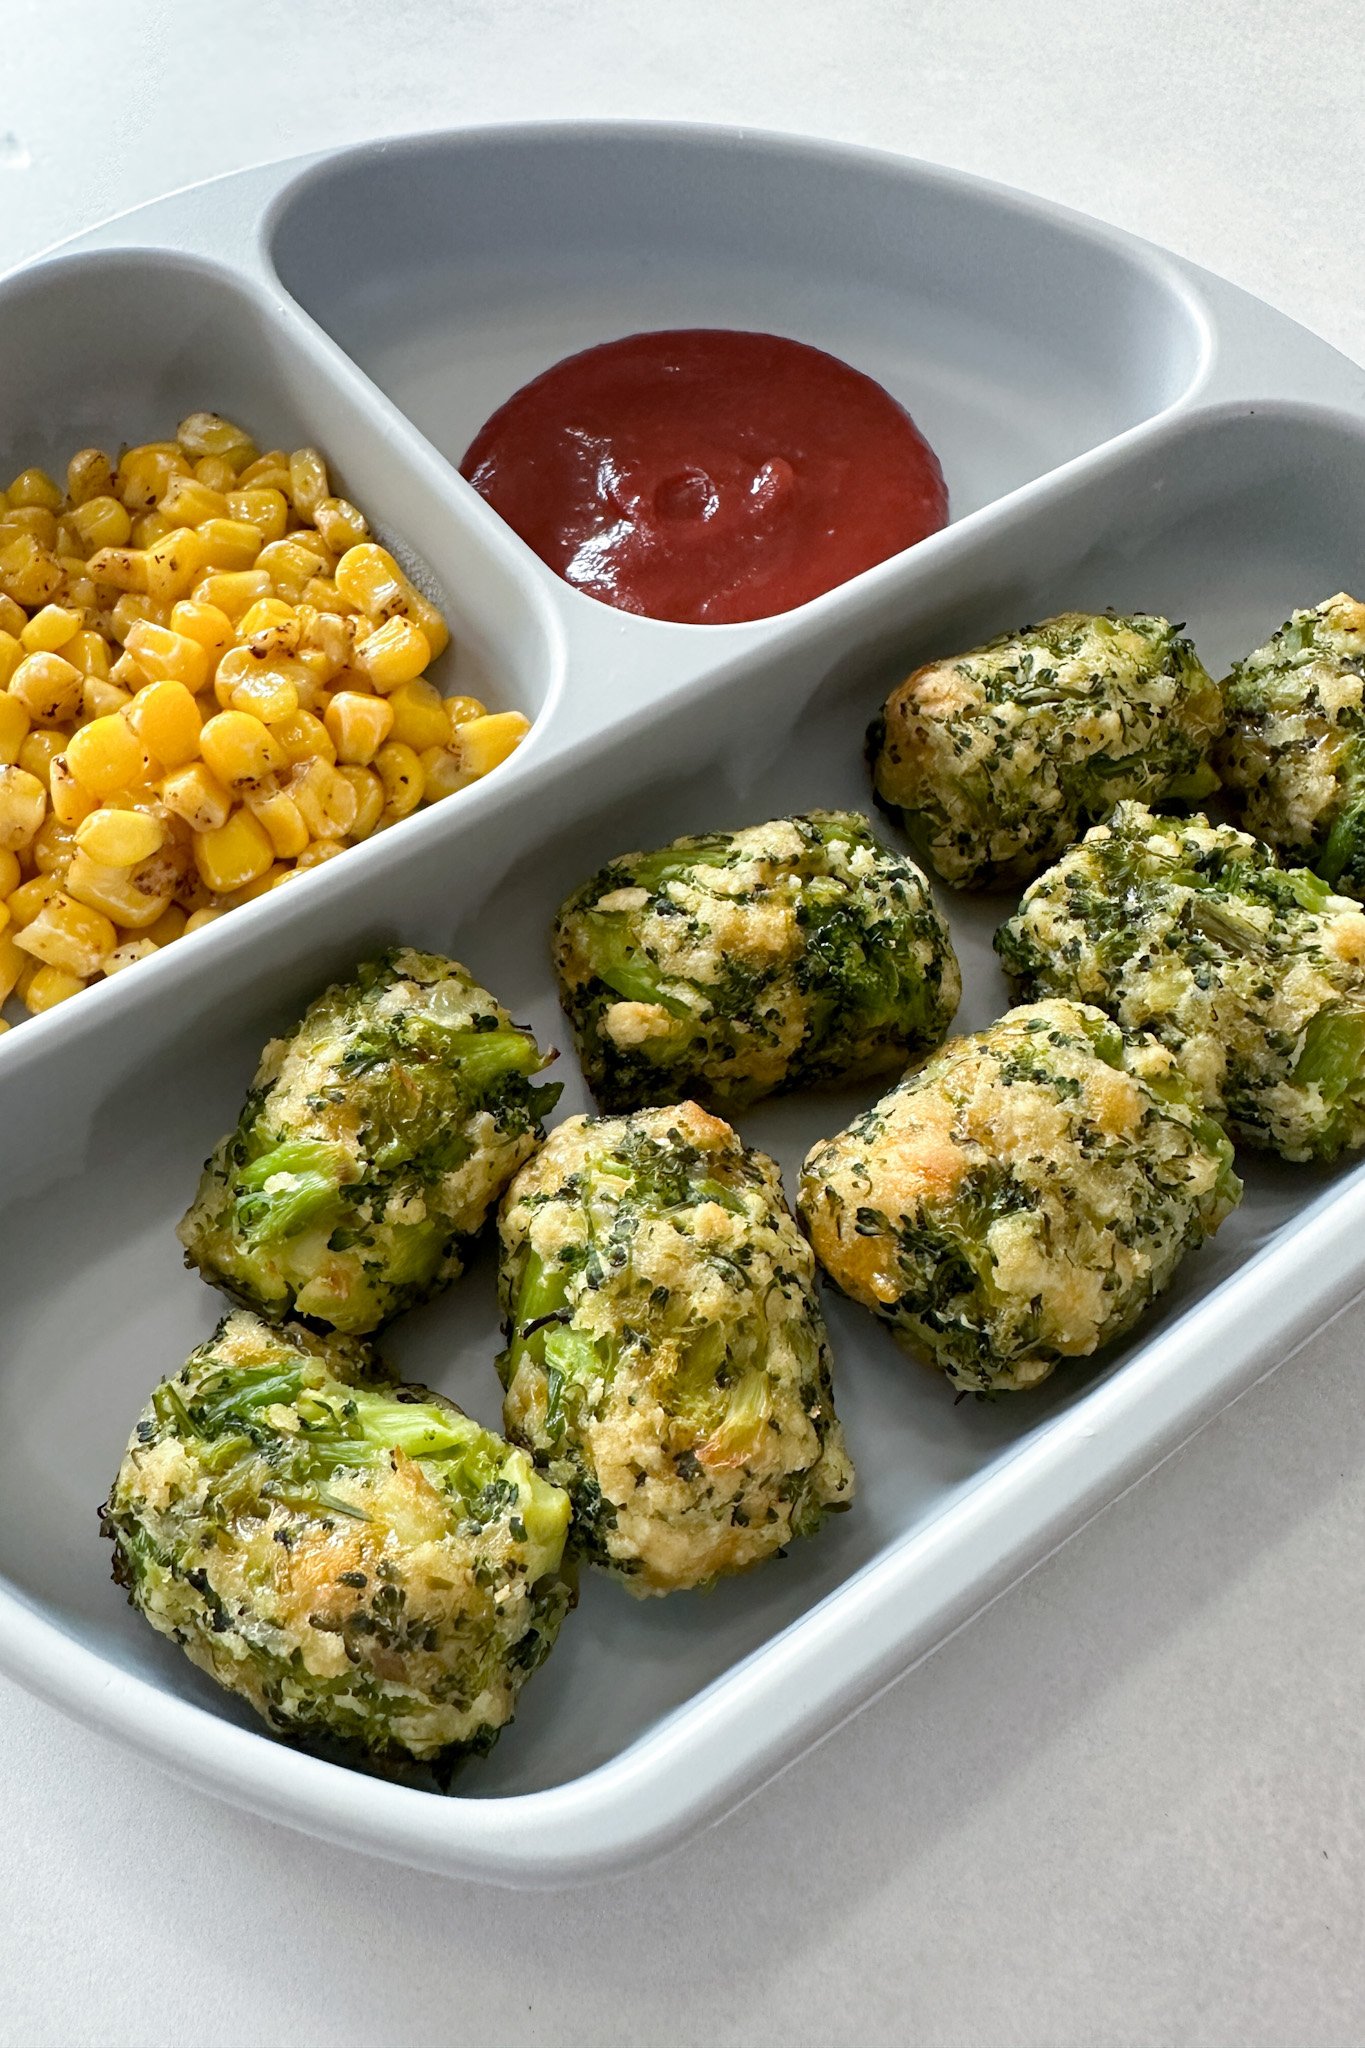 Broccoli tots served with corn and ketchup.